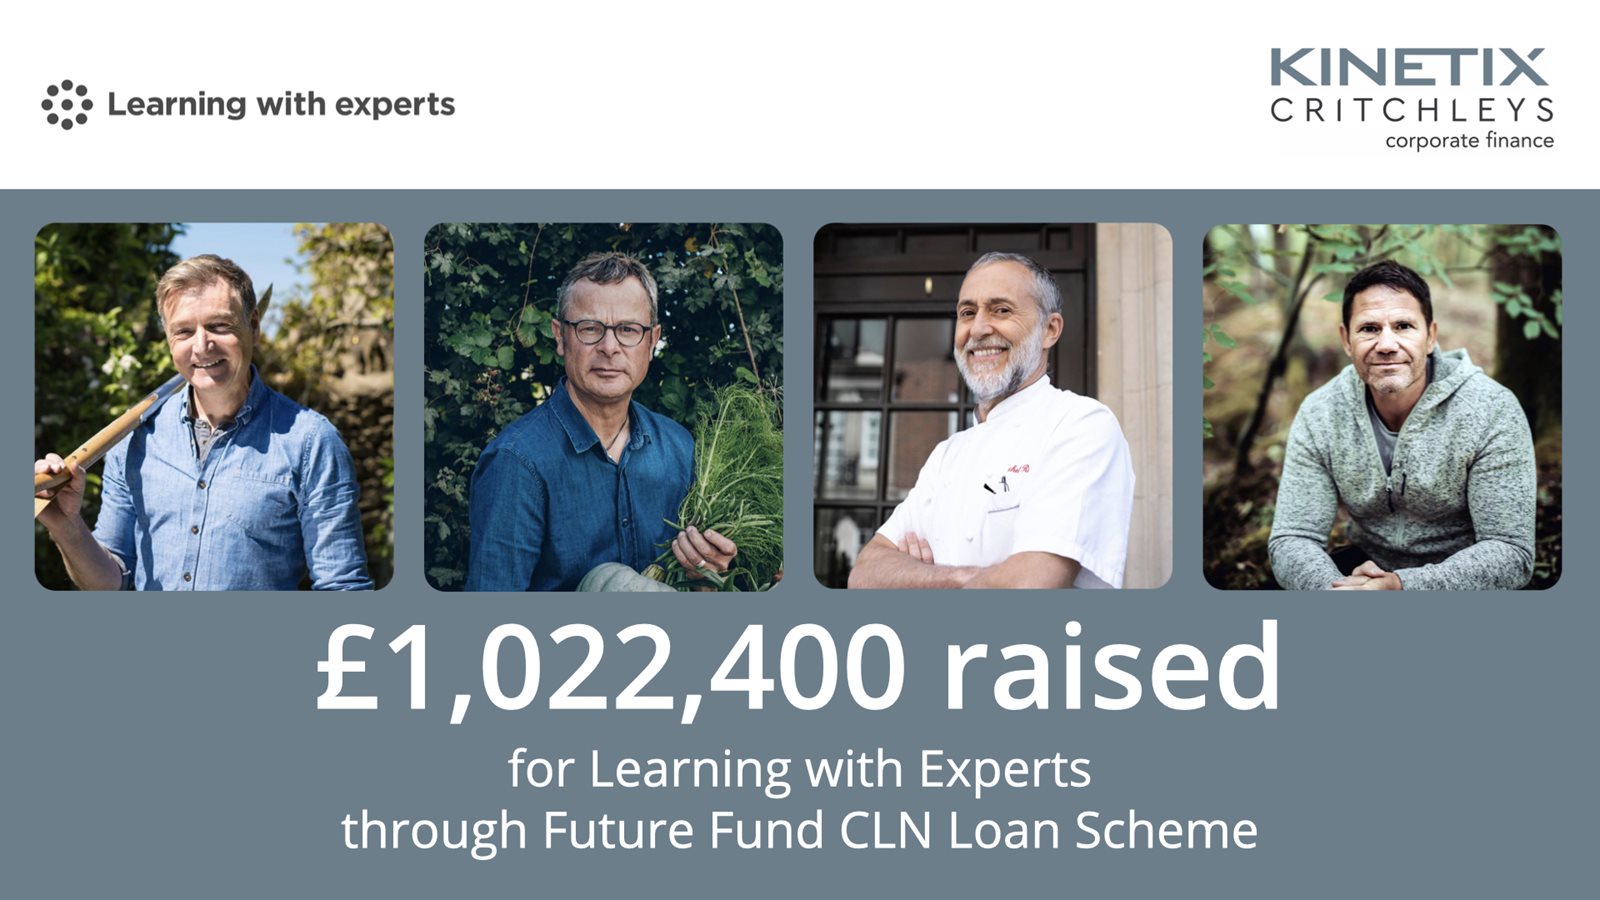 £1,022,400 raised for Learning With Experts